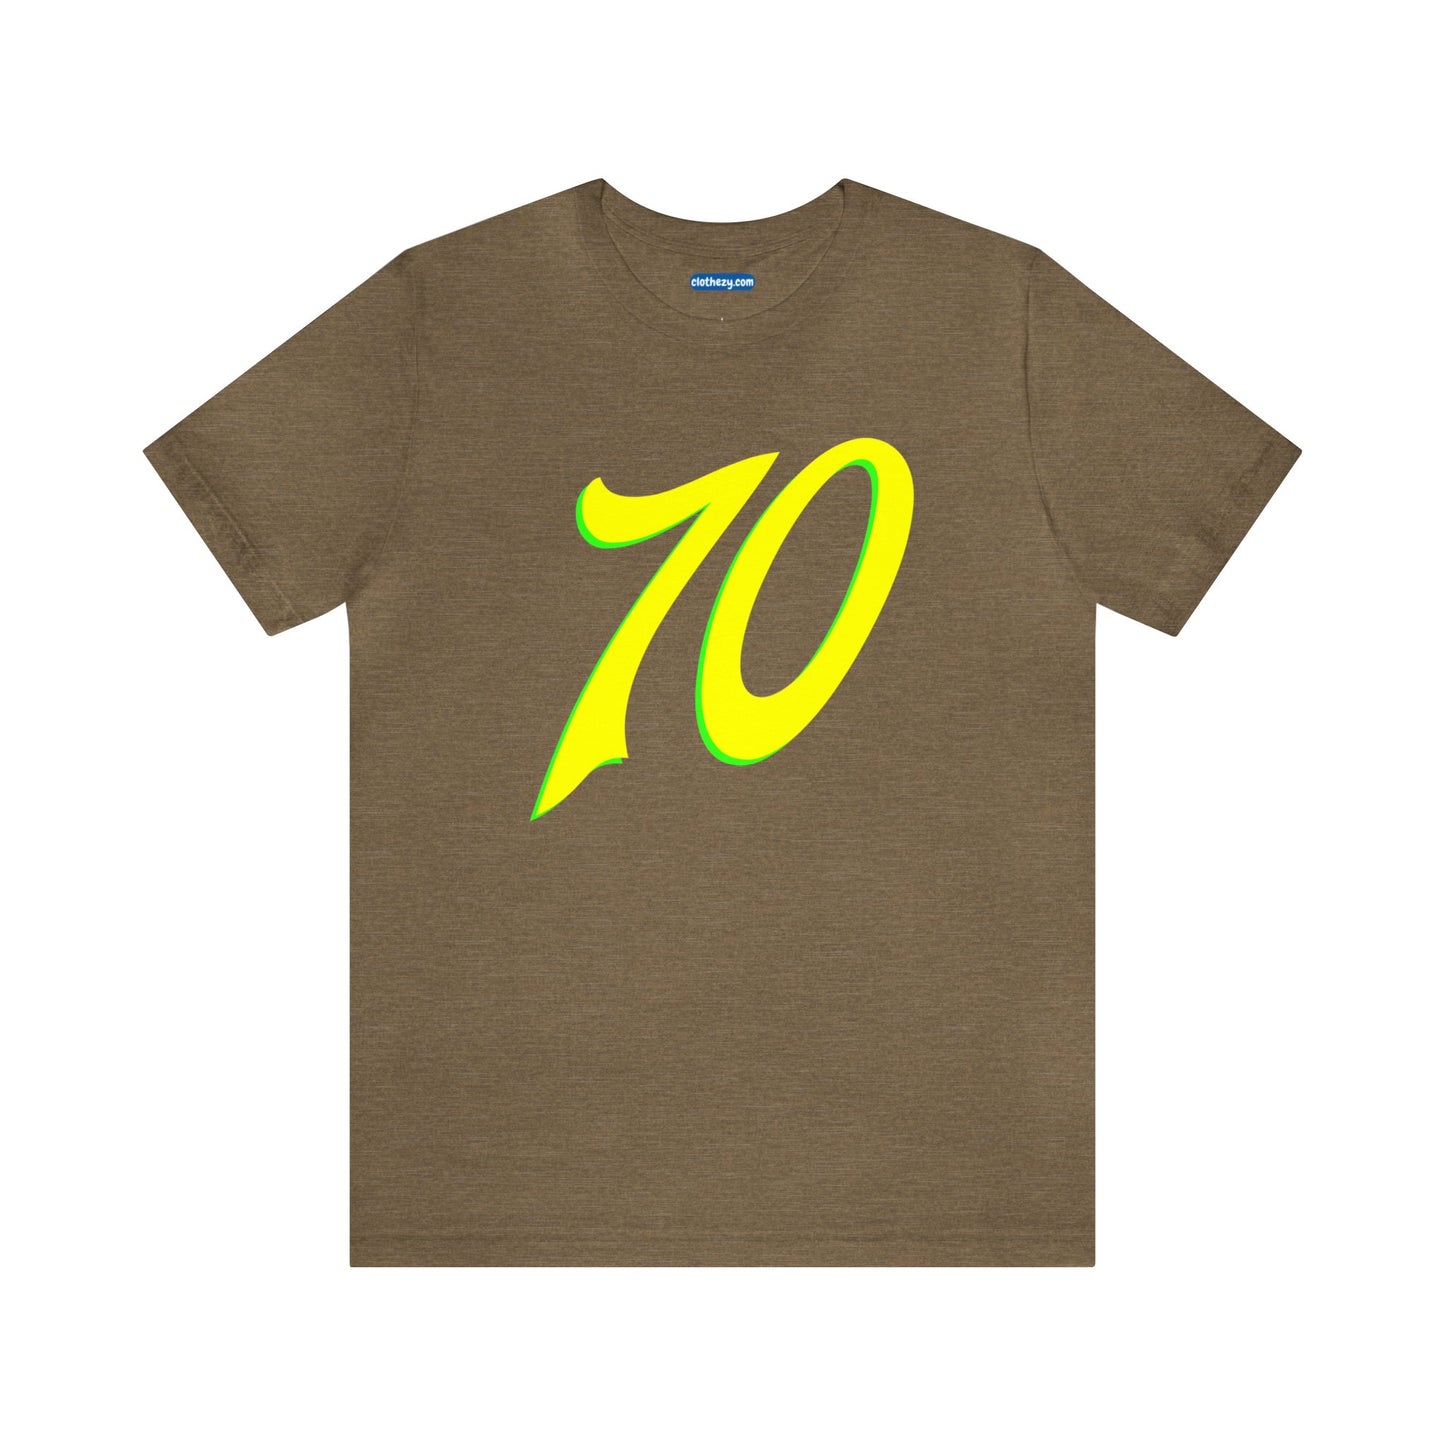 Number 70 Design - Soft Cotton Tee for birthdays and celebrations, Gift for friends and family, Multiple Options by clothezy.com in Olive Heather Size Small - Buy Now